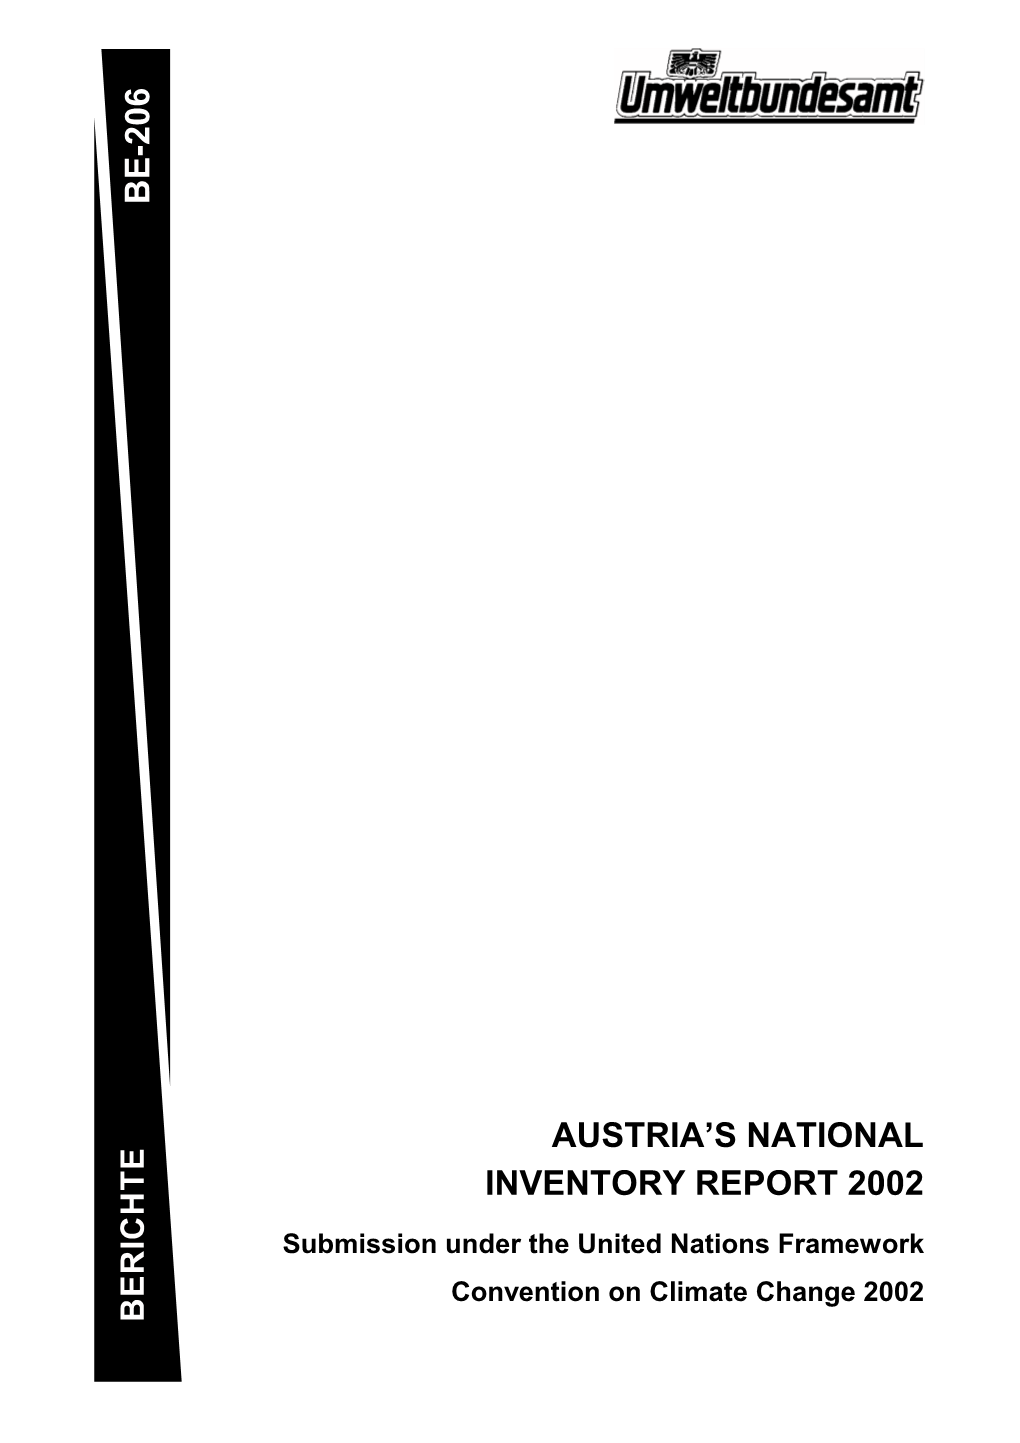 Be-206 Austria's National Inventory Report 2002